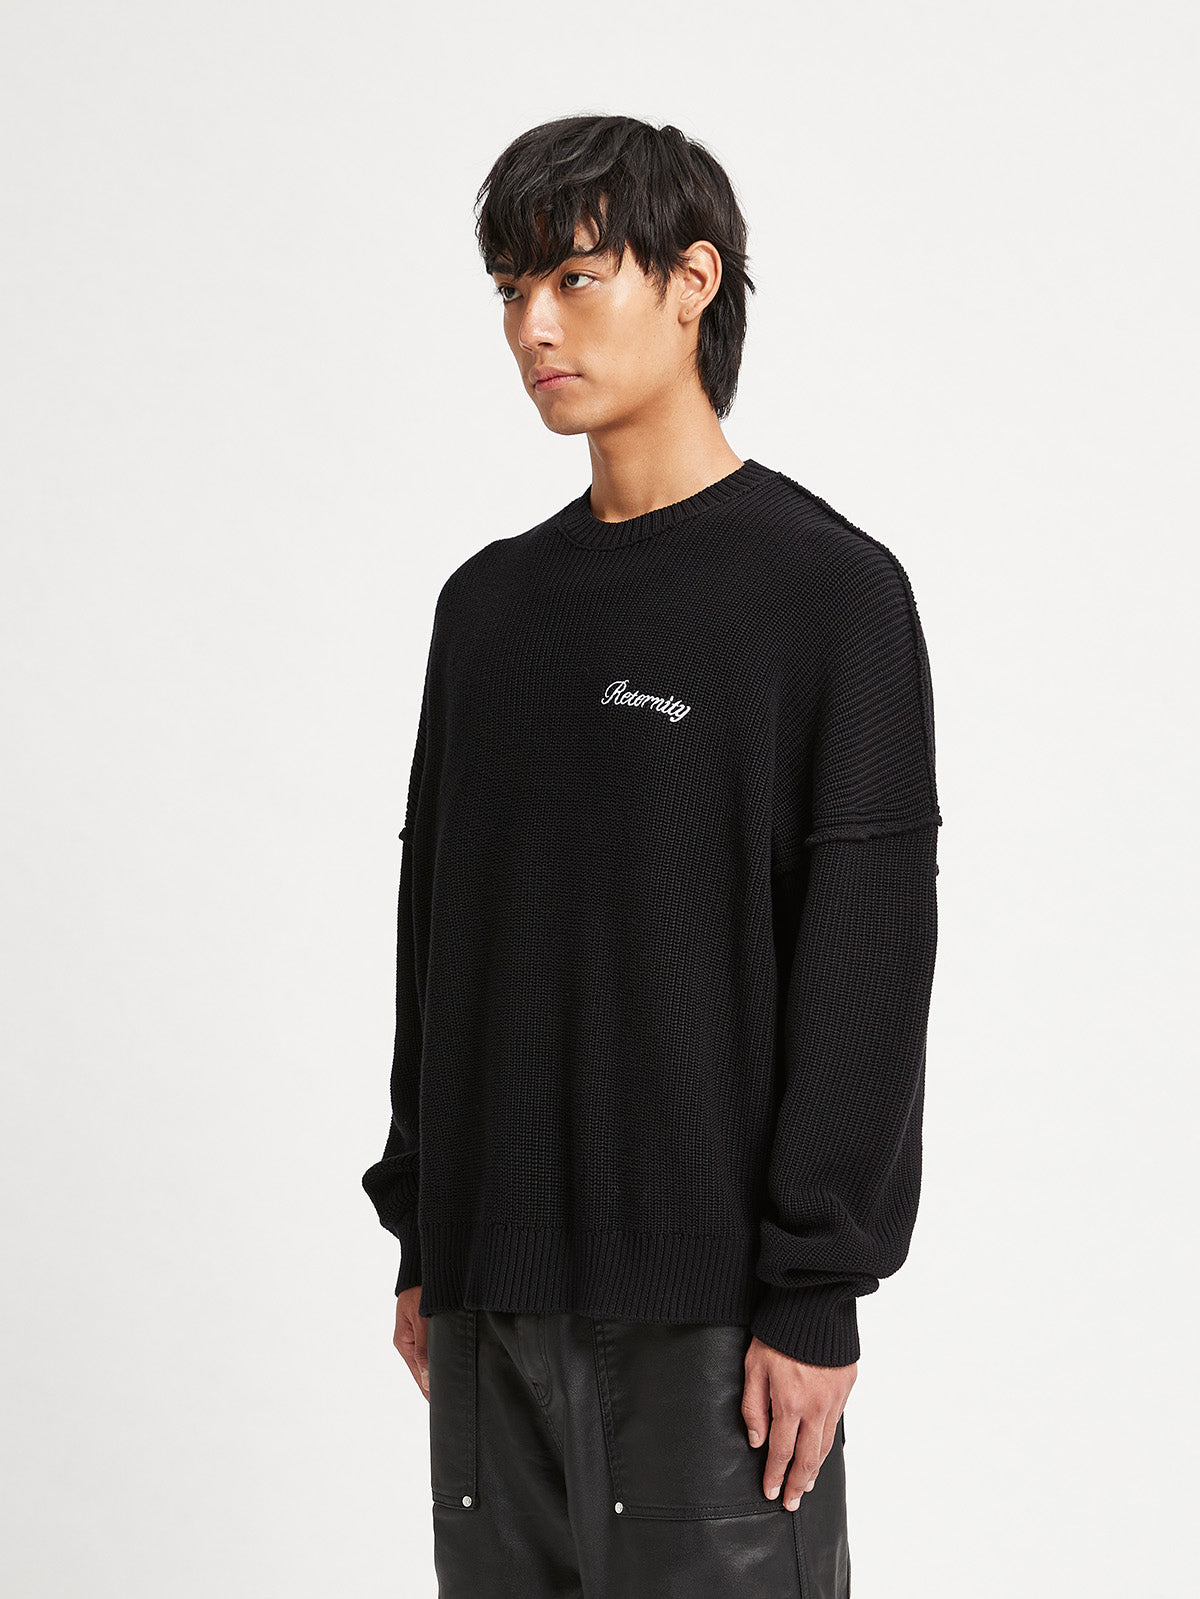 KNIT SWEATER THE TROPHY SERIES - BLACK